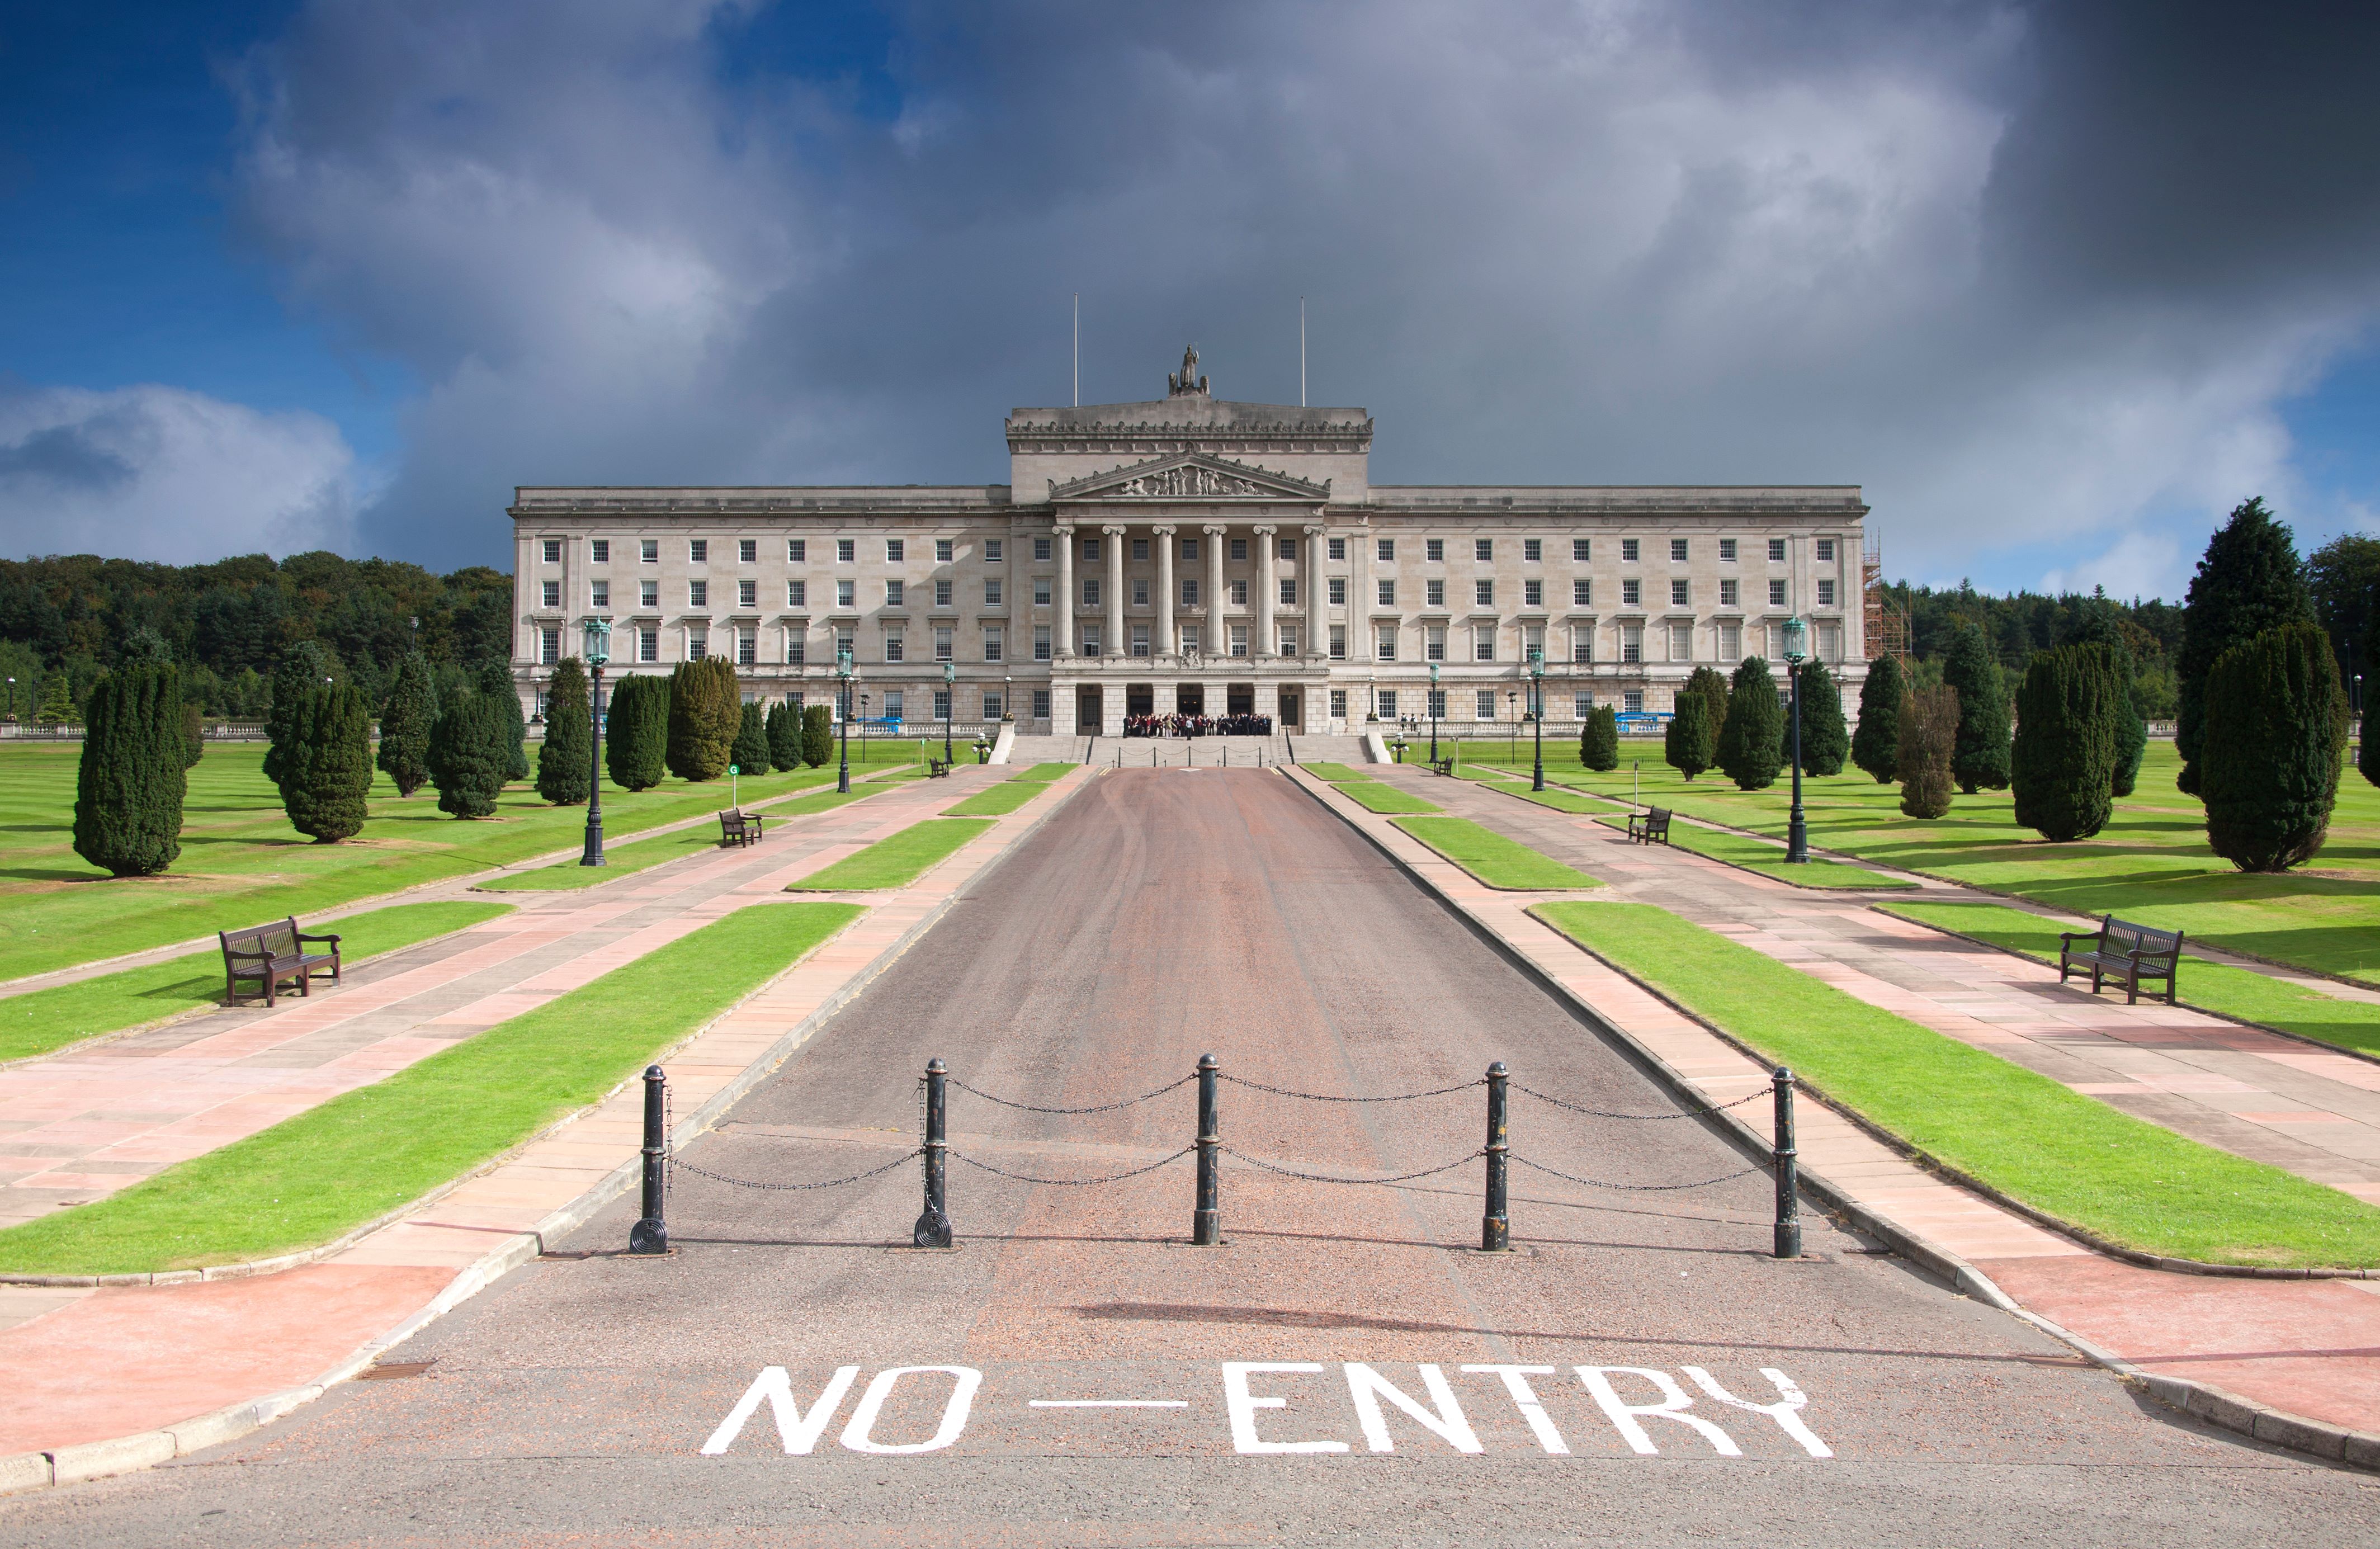 Northern Ireland Stormont with 'closed' painted on ground in front of entrance